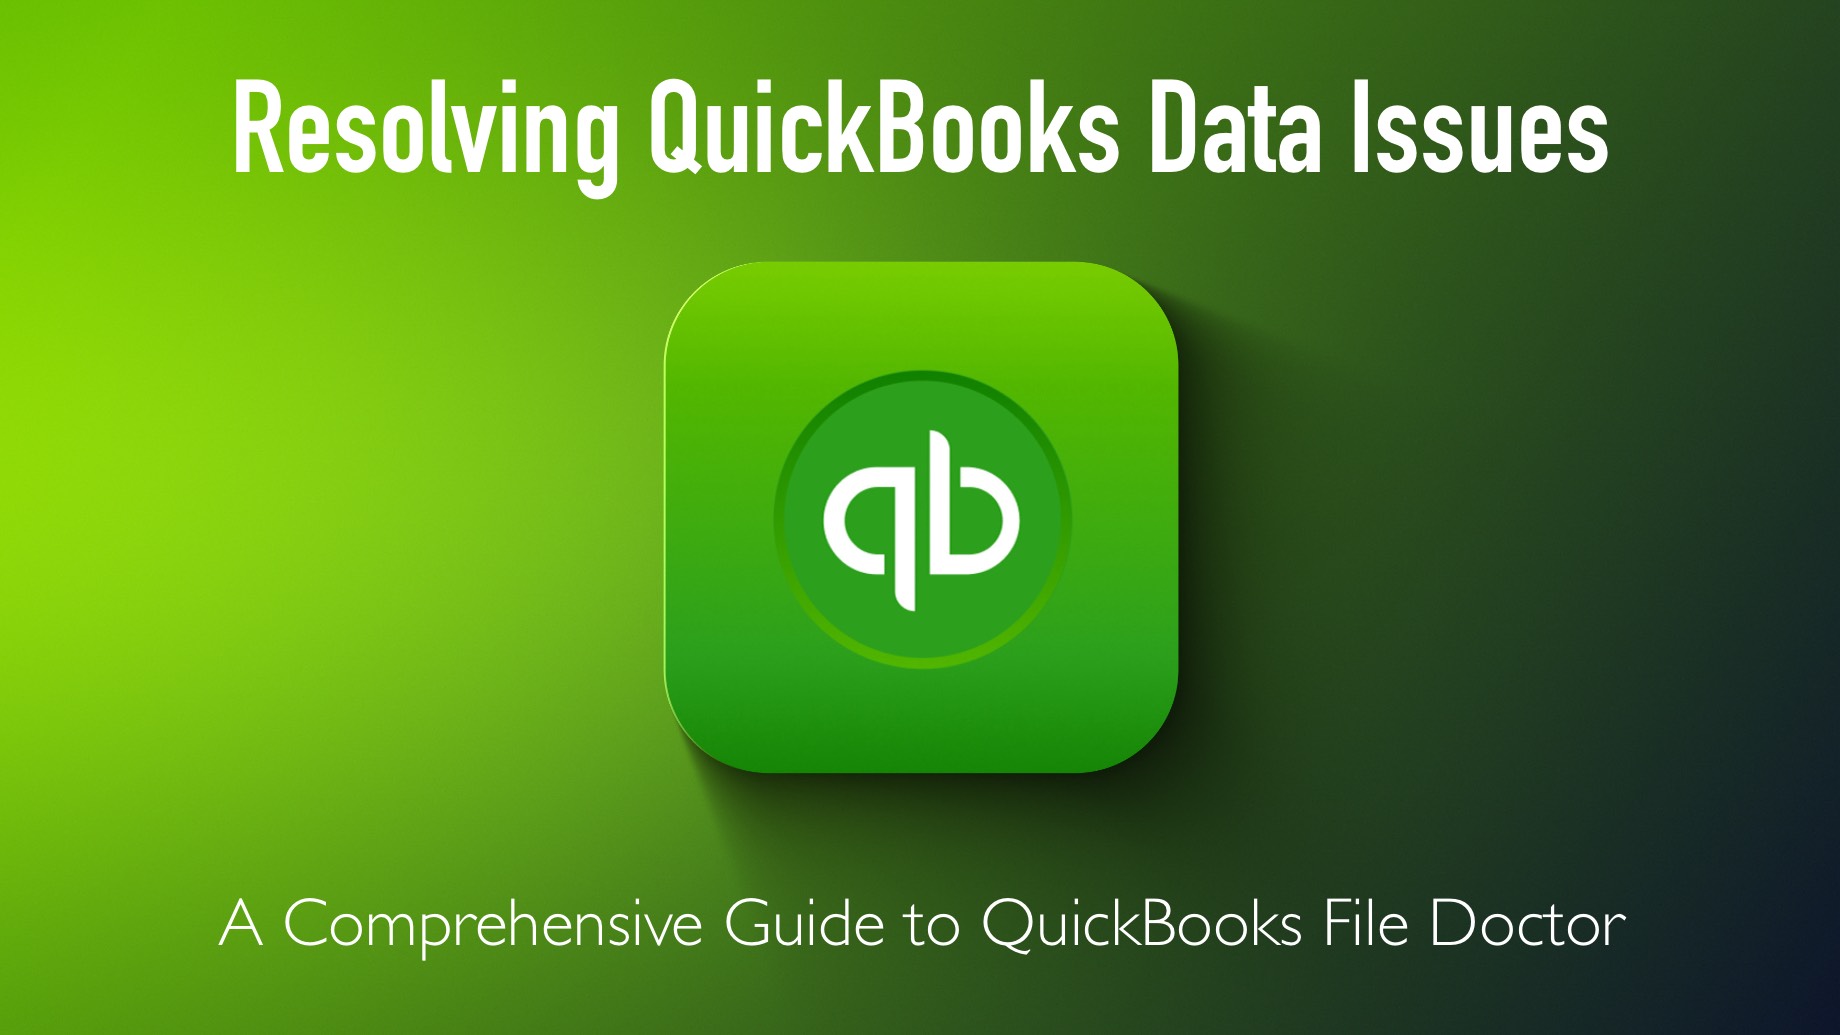 Resolving QuickBooks Data Issues: A Comprehensive Guide to QuickBooks File Doctor